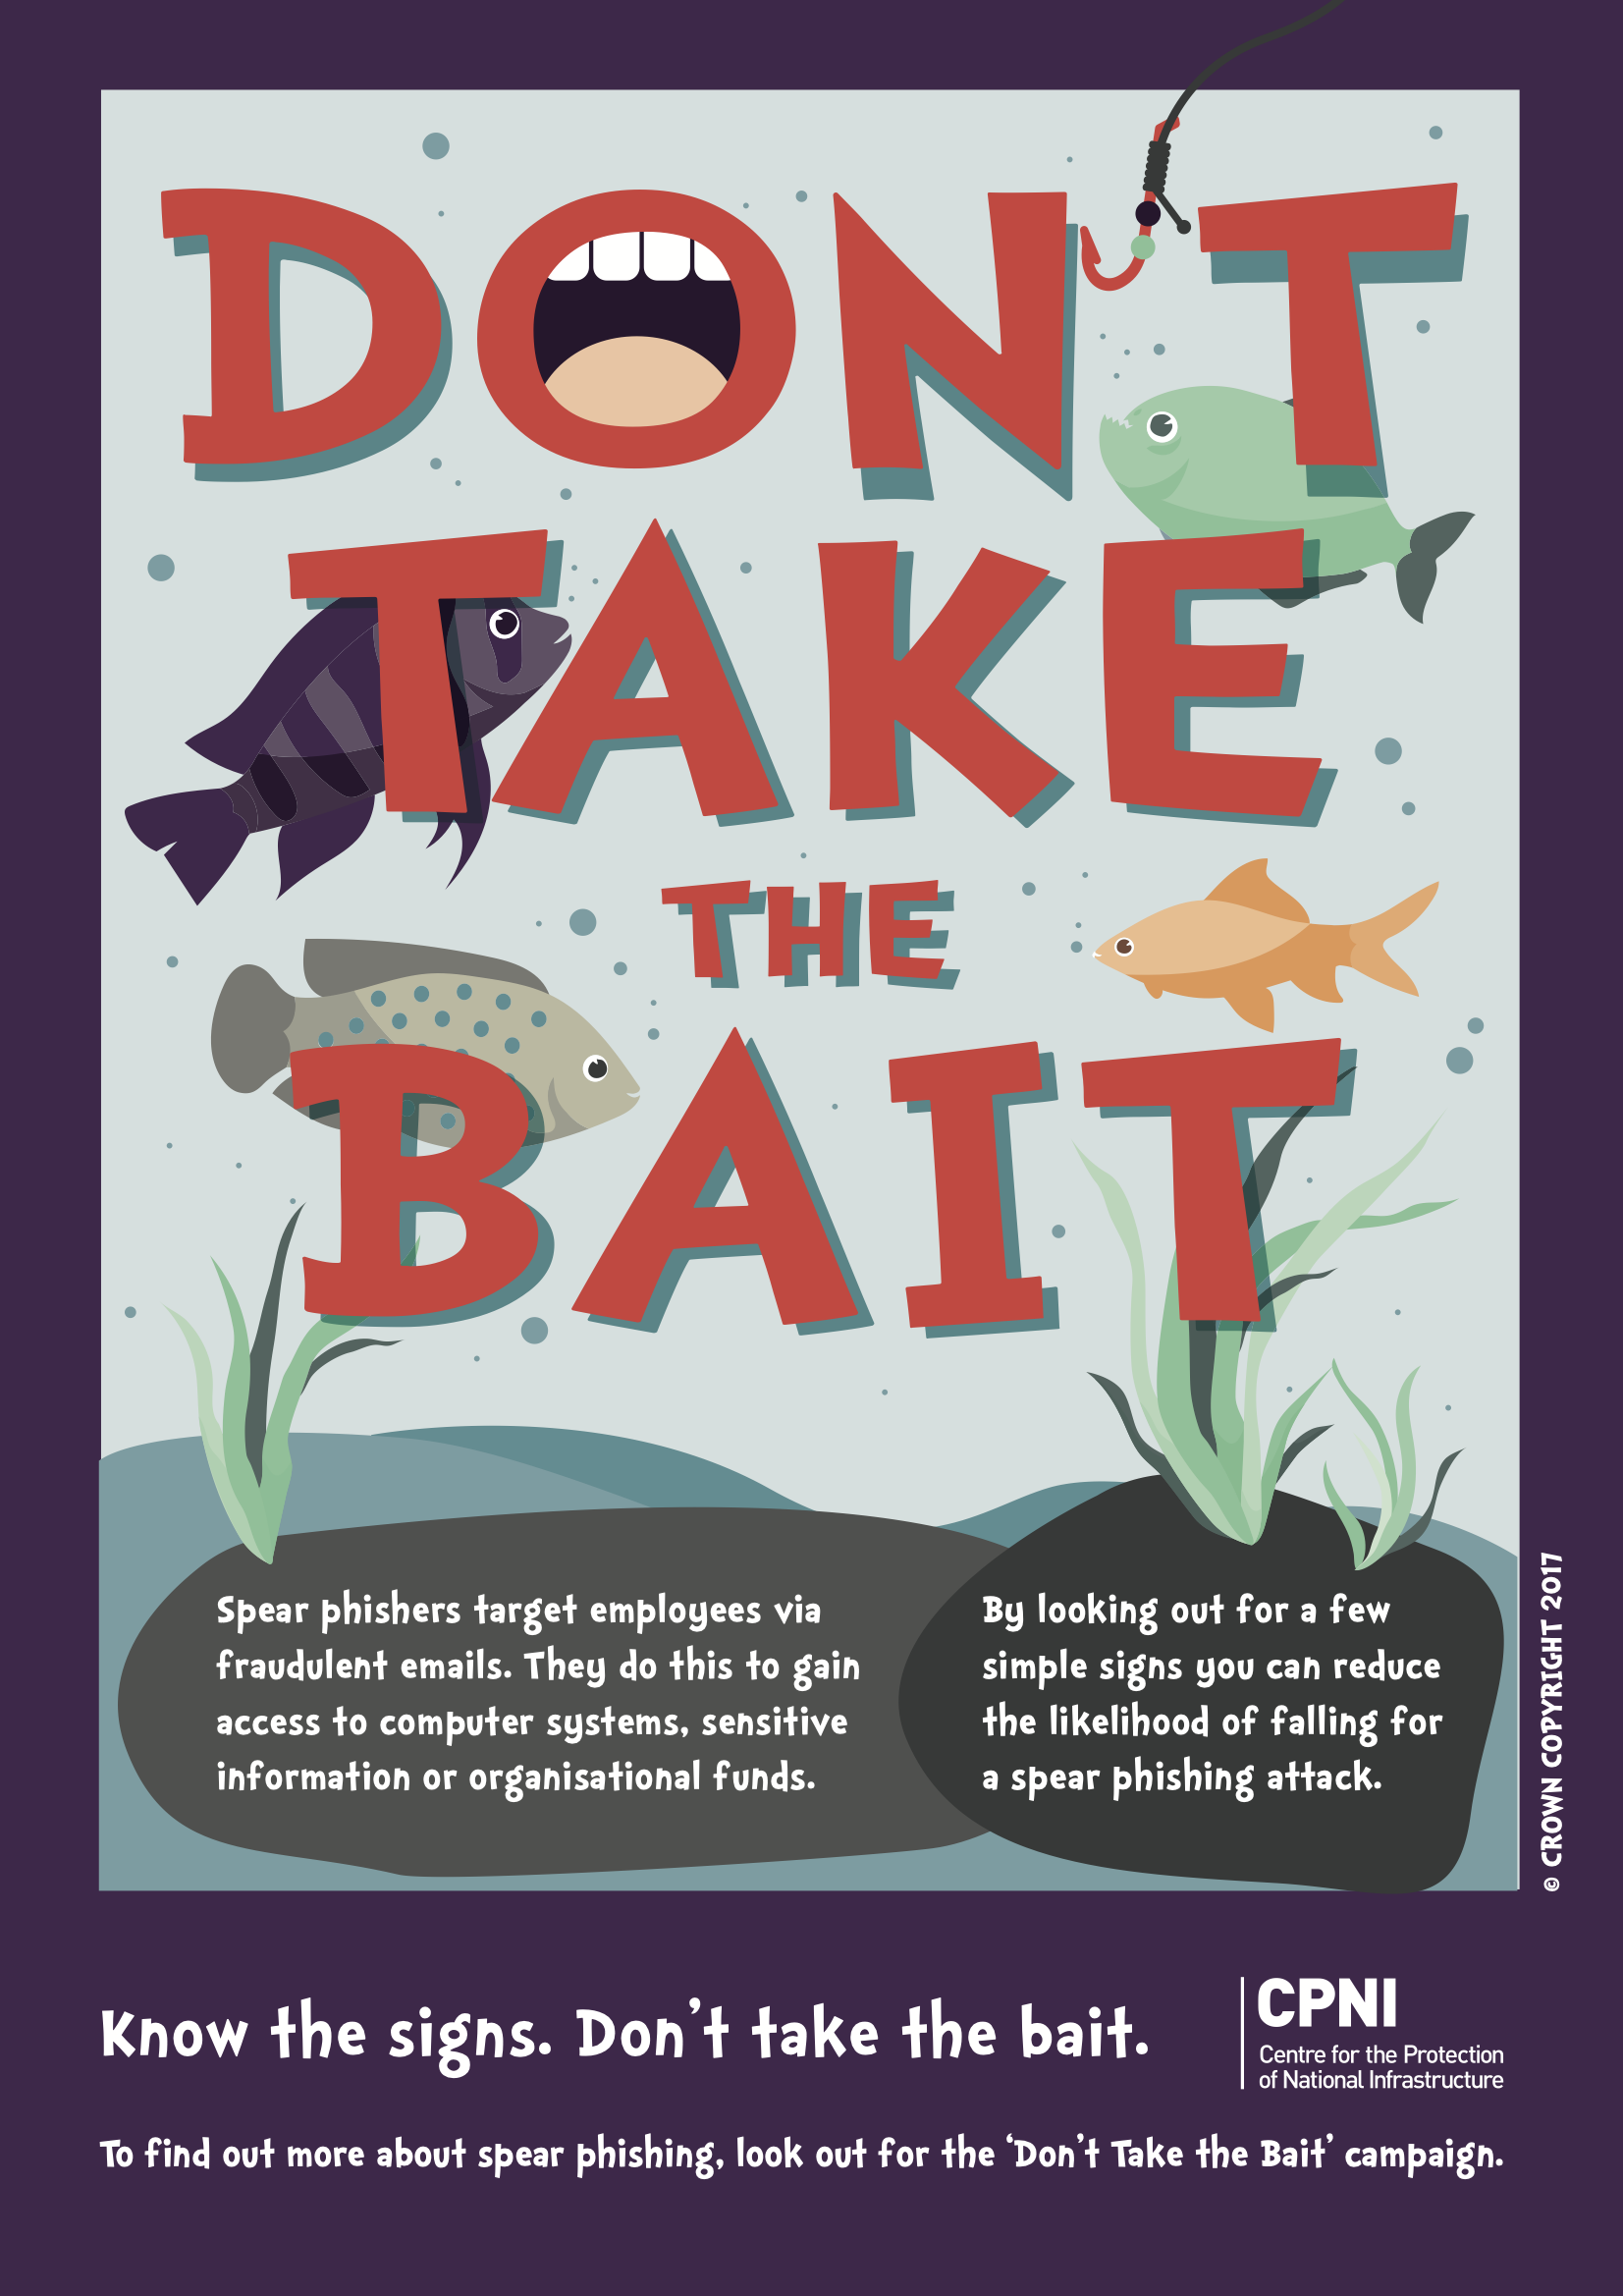 'Don't take the bait!' poster